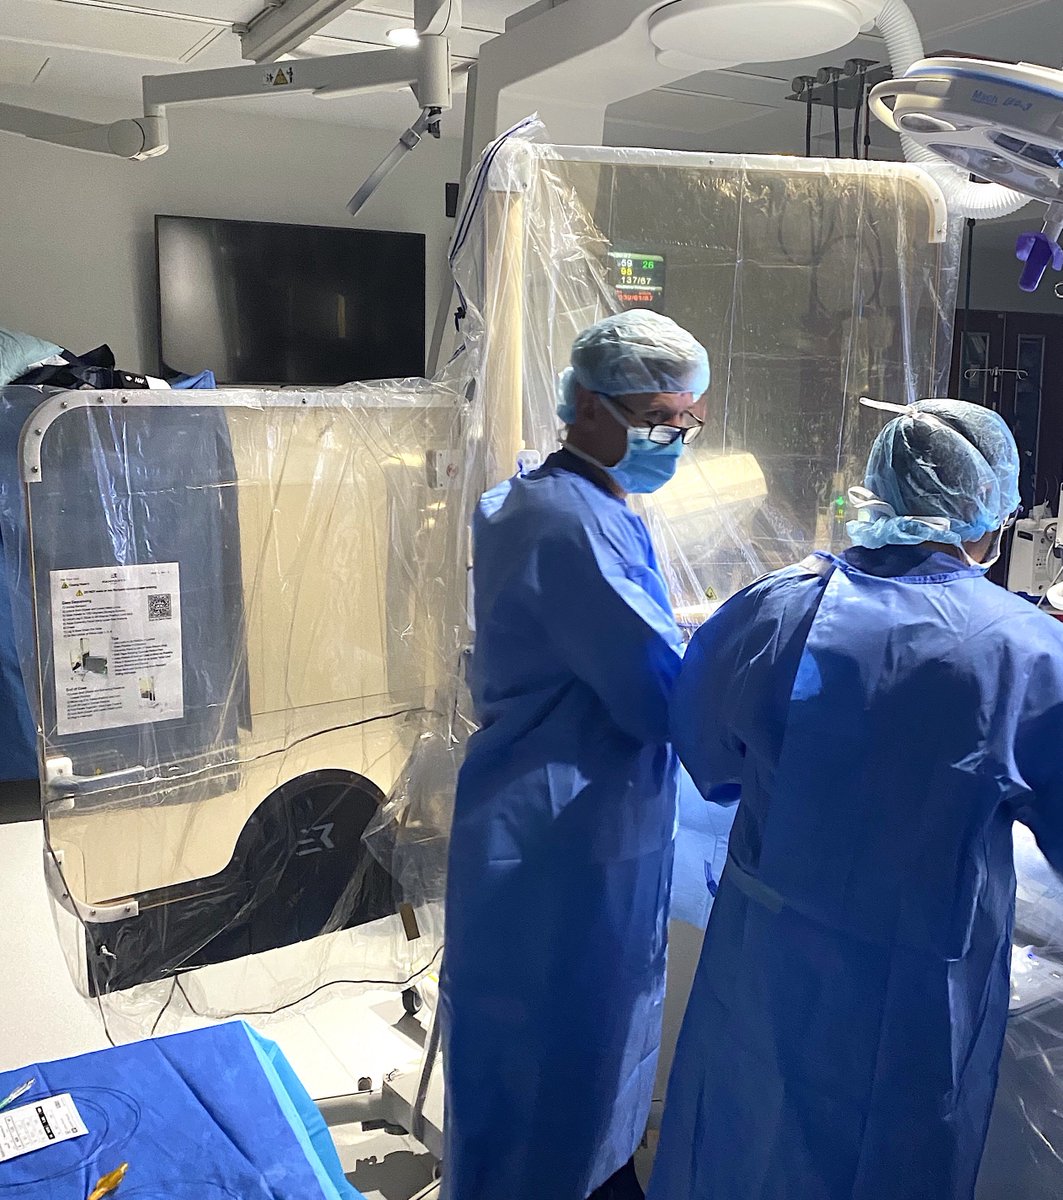 The revolution to reduce radiation and ortho fatigue with @RampartIC has now spread to Kansas! We're honored to work with Dr. Steve Marso and team at Overland Park HCA Midwest. #CathLab #ProtectTheTeam #ShedTheLead rampartic.com/contact-us